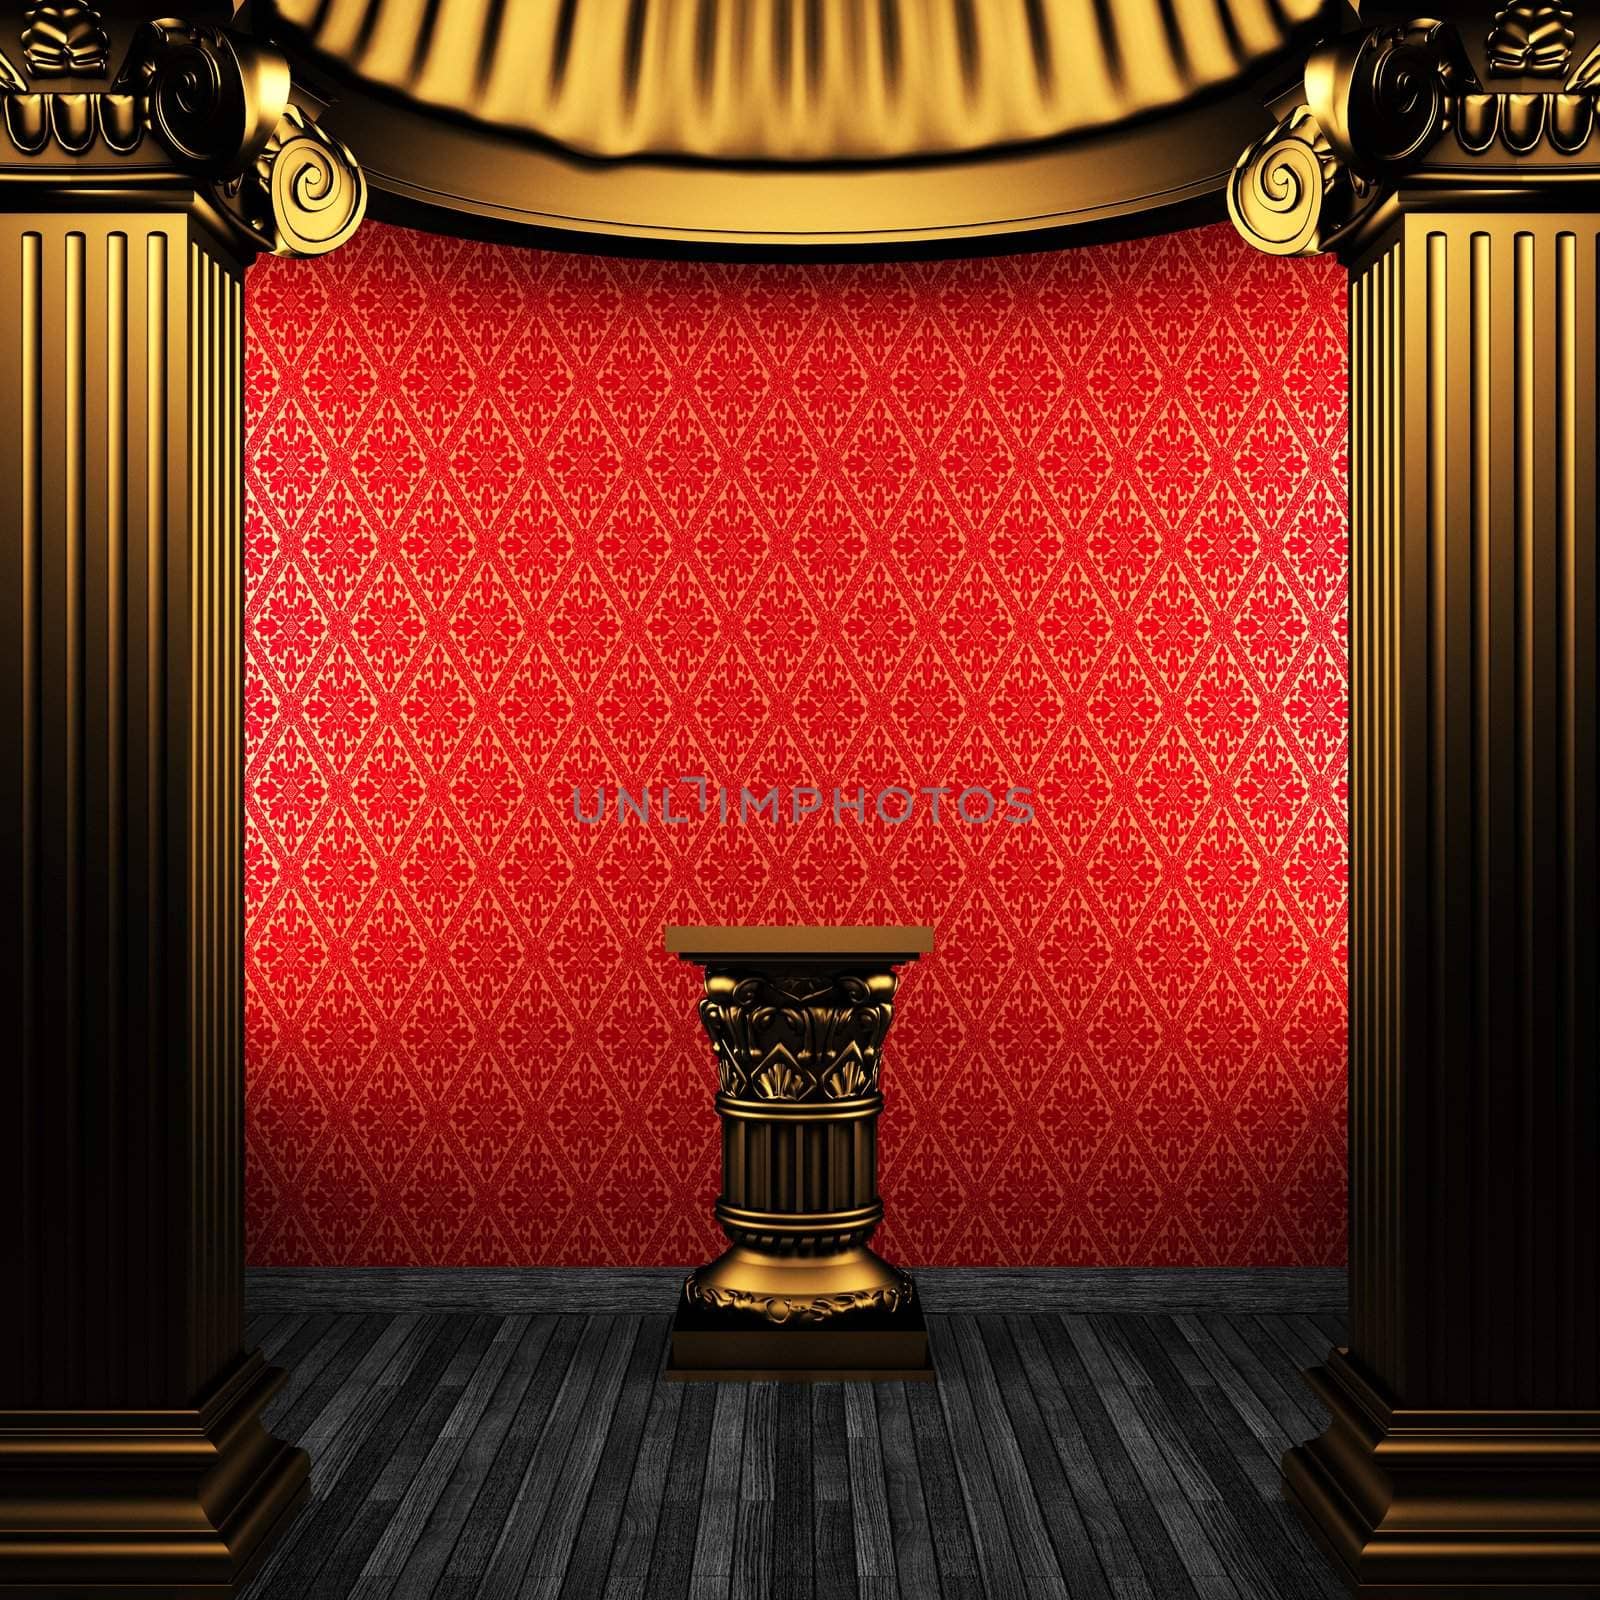 bronze columns, pedestal and wallpaper by icetray